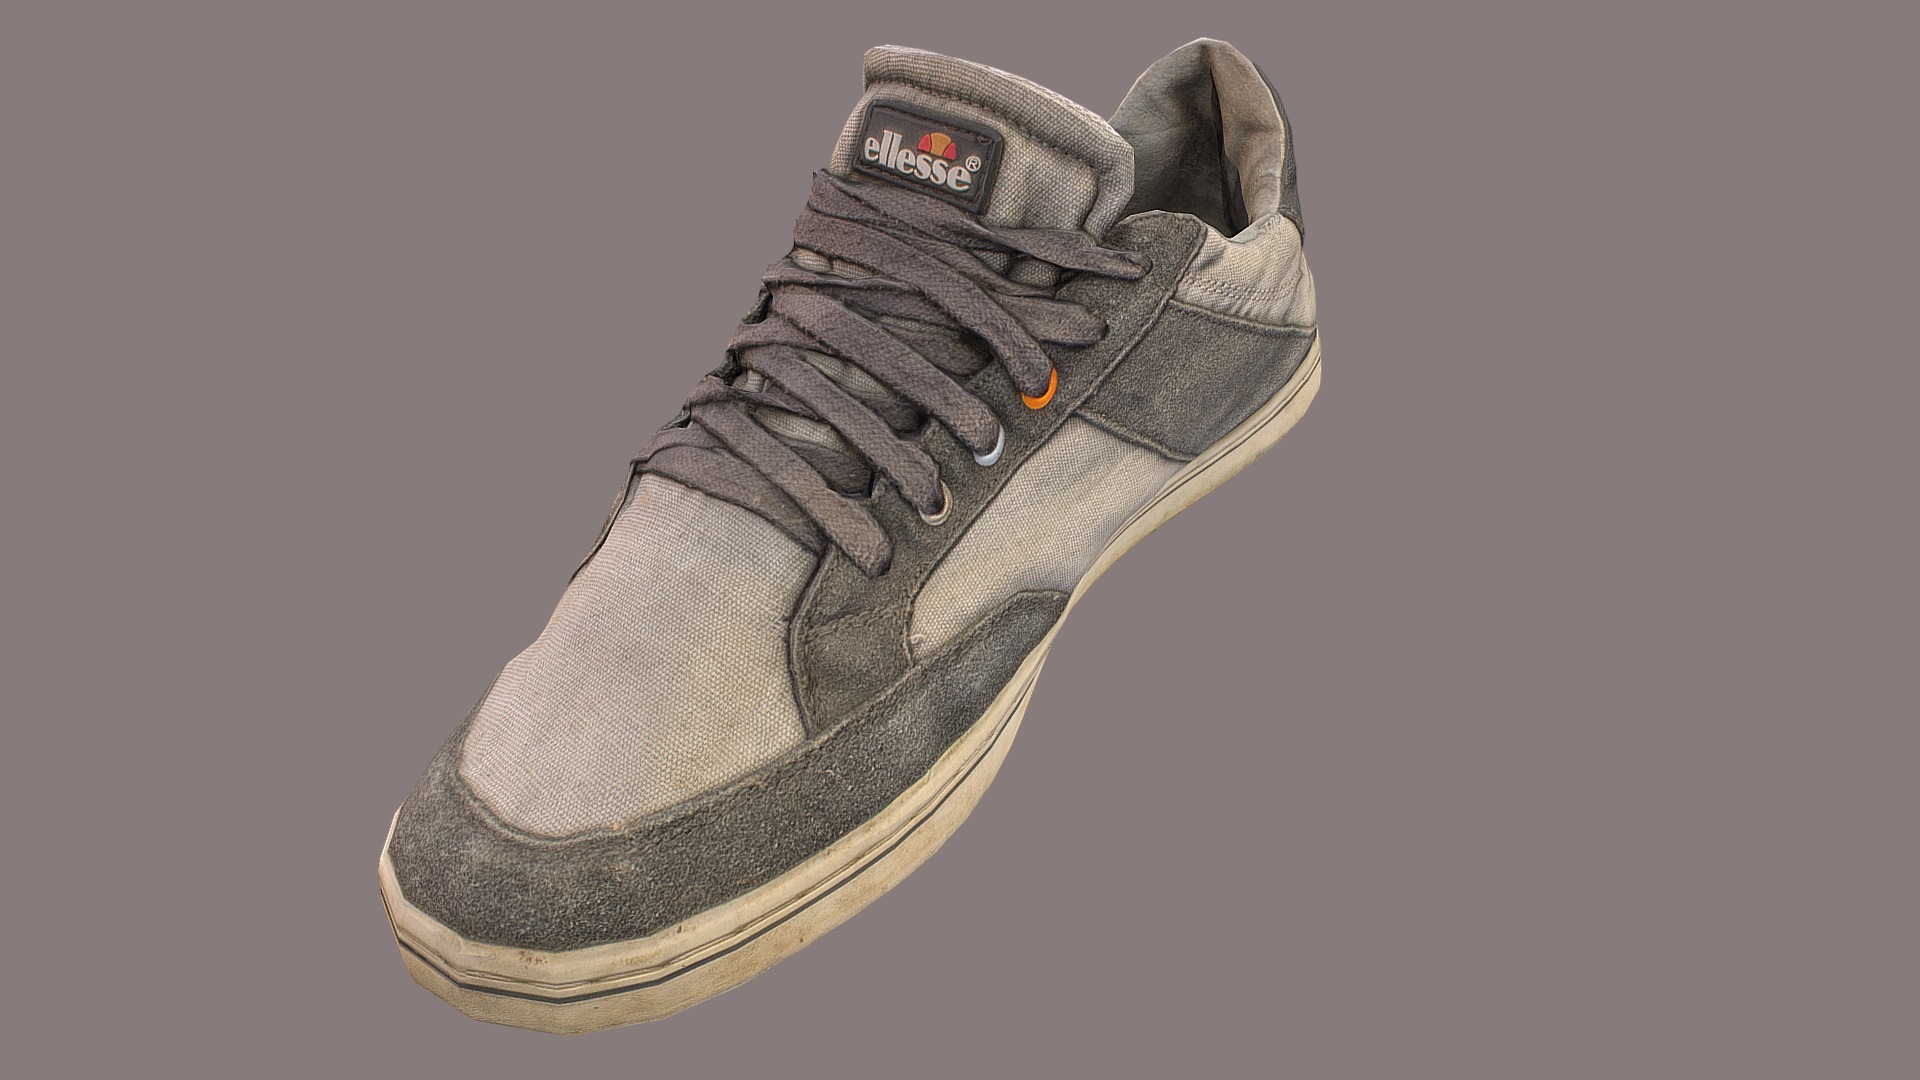 3D model Worn sneaker low poly - This is a 3D model of the Worn sneaker low poly. The 3D model is about a close up of a shoe.